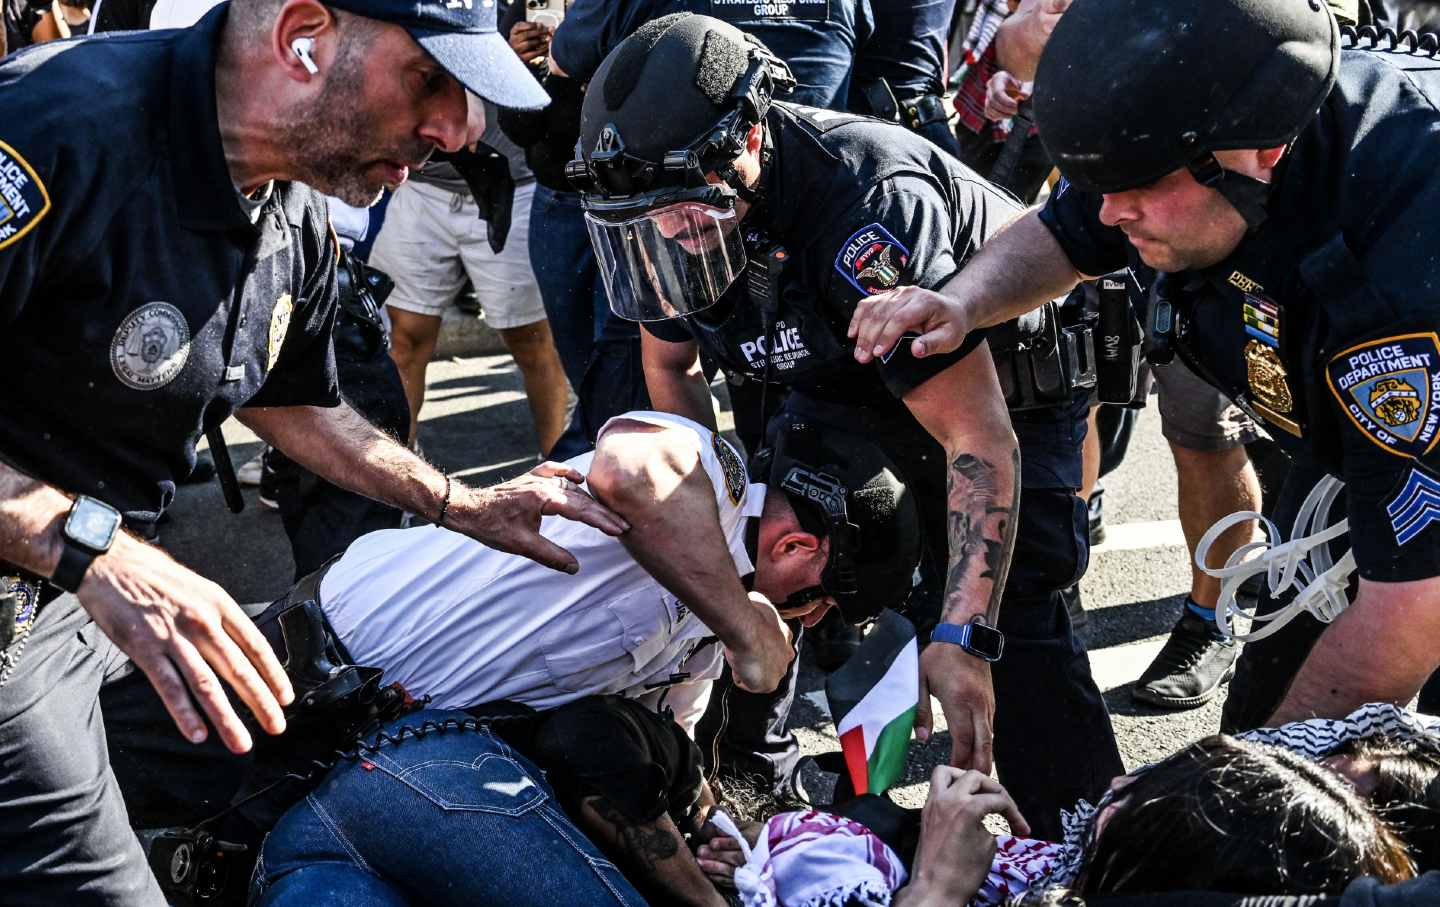 A police commander punches a protester in Brooklyn on May 31 during a demonstration against Israeli attacks on Rafah. A New York court approved a settlement agreement that obligates the NYPD to minimize its presence at protests and facilitate First Amendment activity.